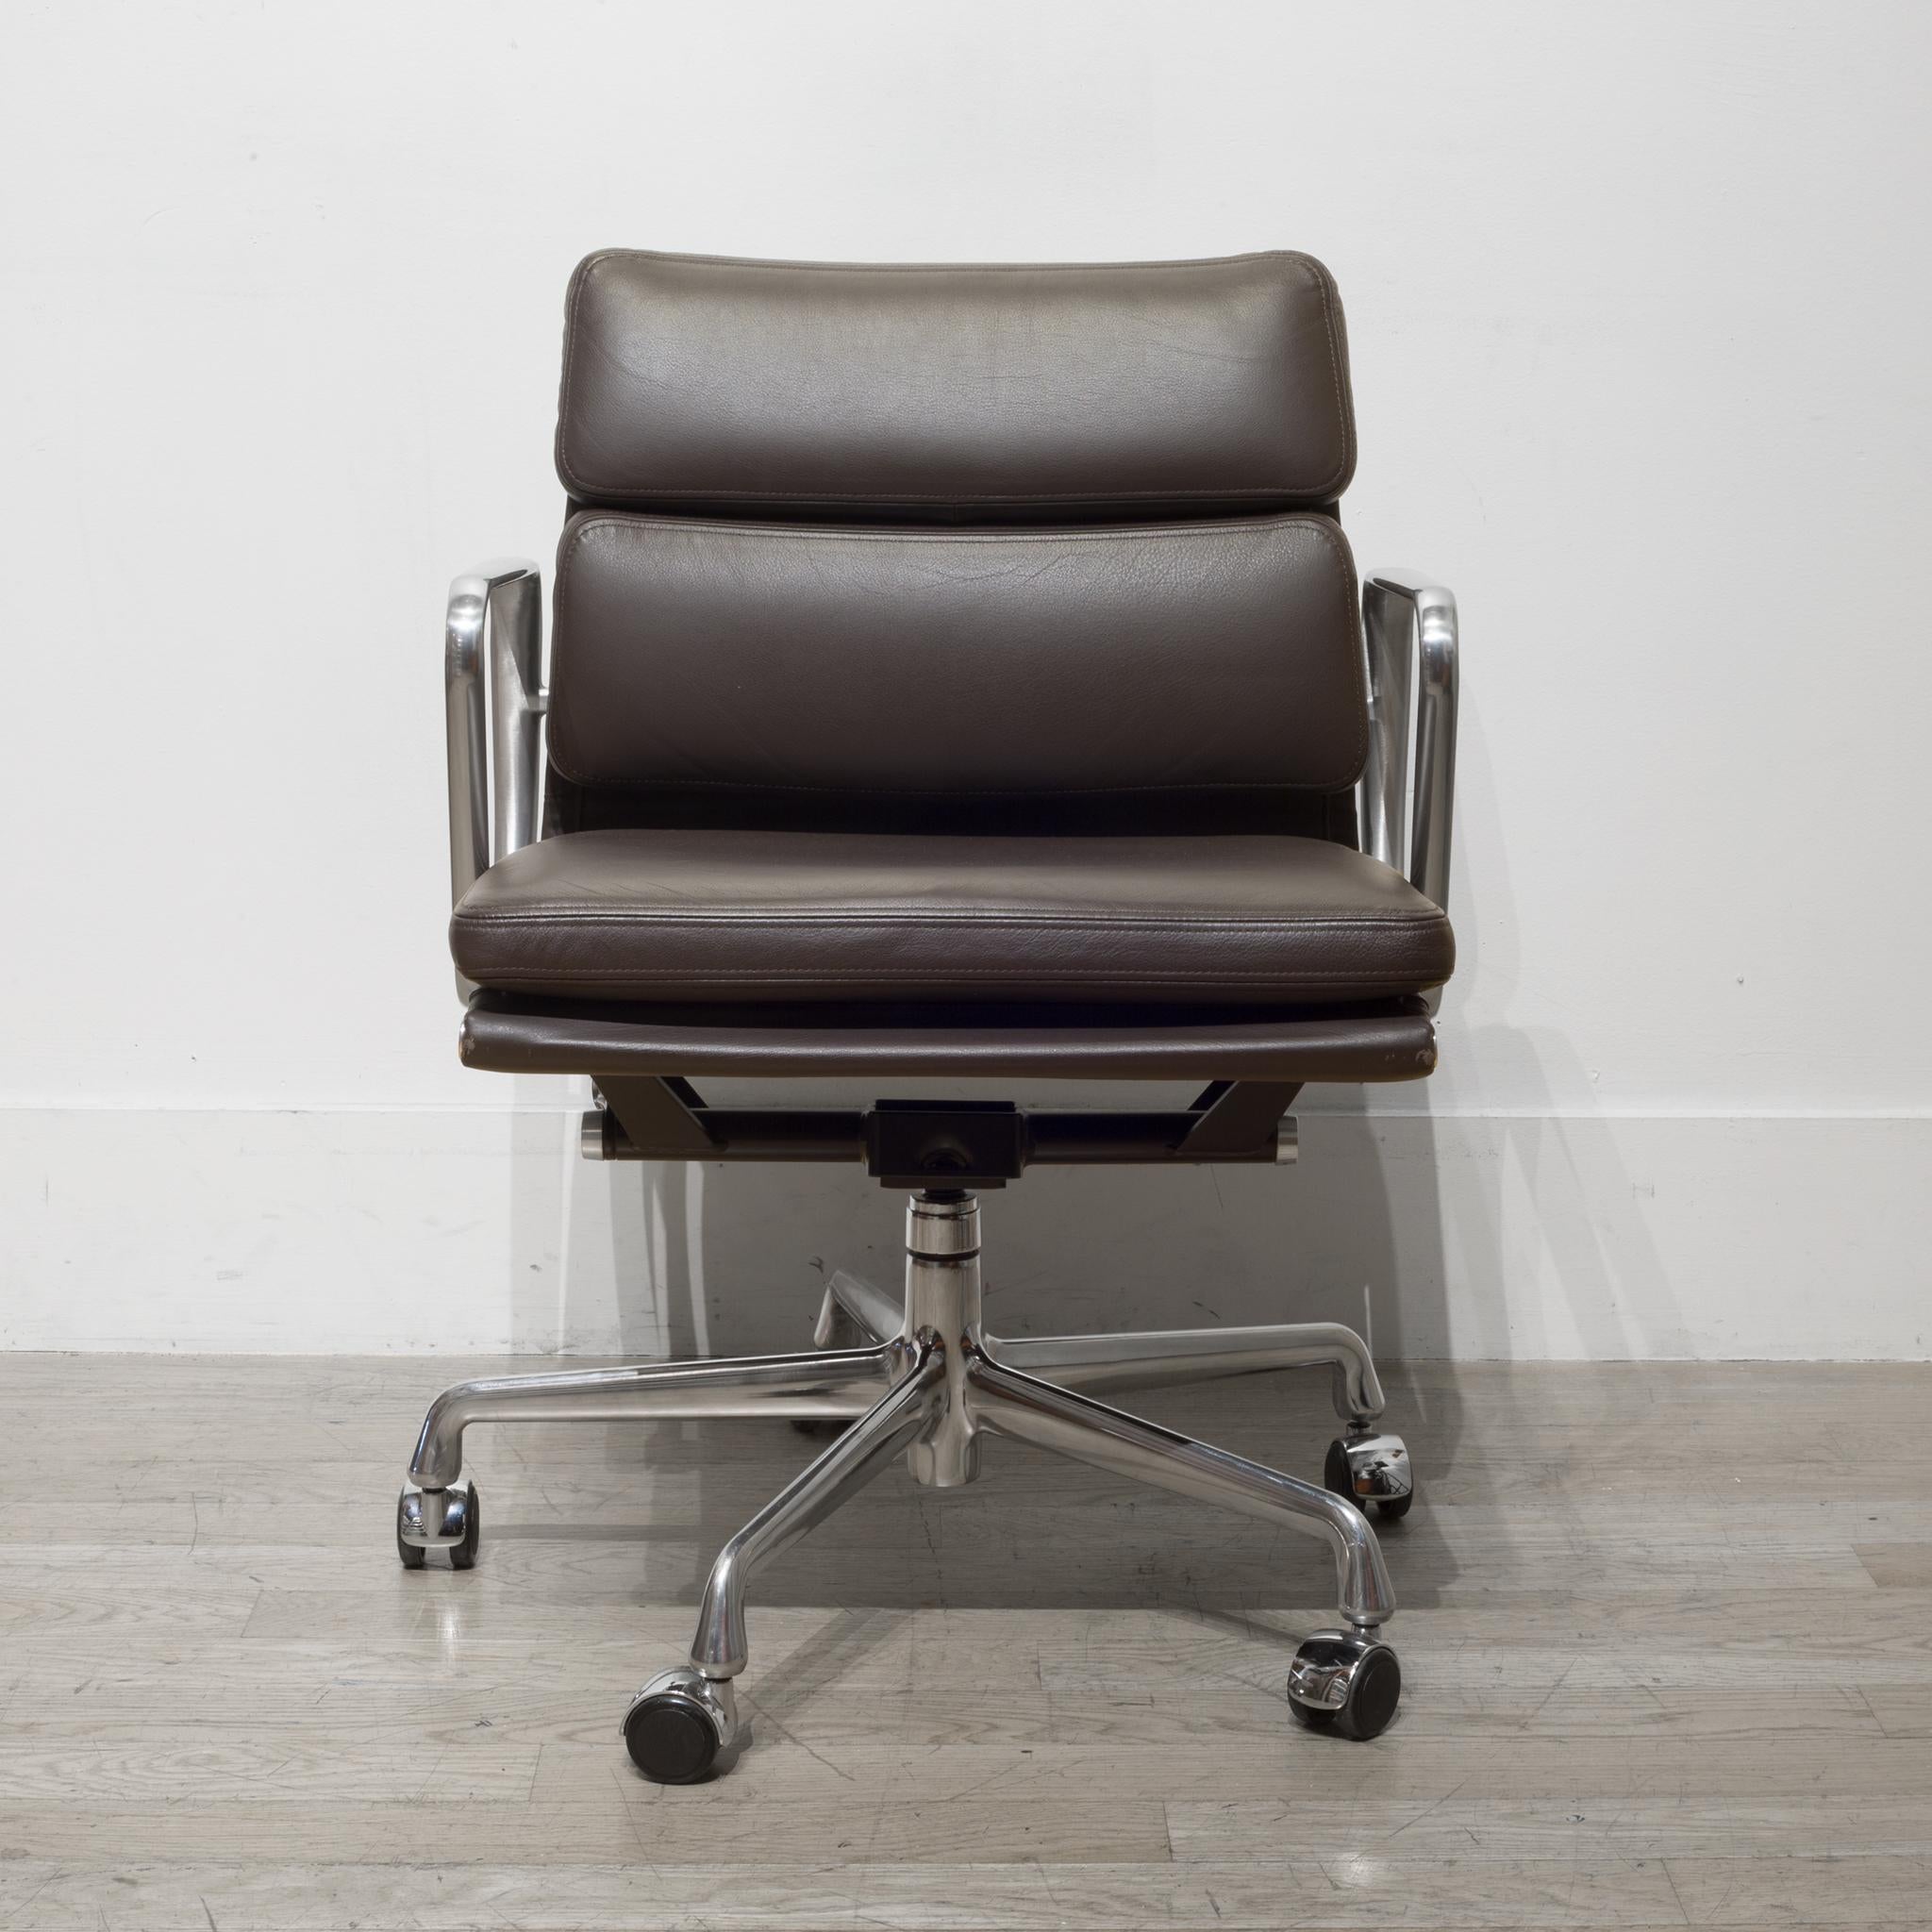 About

Price is per chair. Twelve chairs available.
Eames soft pad leather office management swivel chairs in Espresso brown MCL leather with polished aluminum base and casters. Original Herman Miller and Eames label on each chair.

Creator: